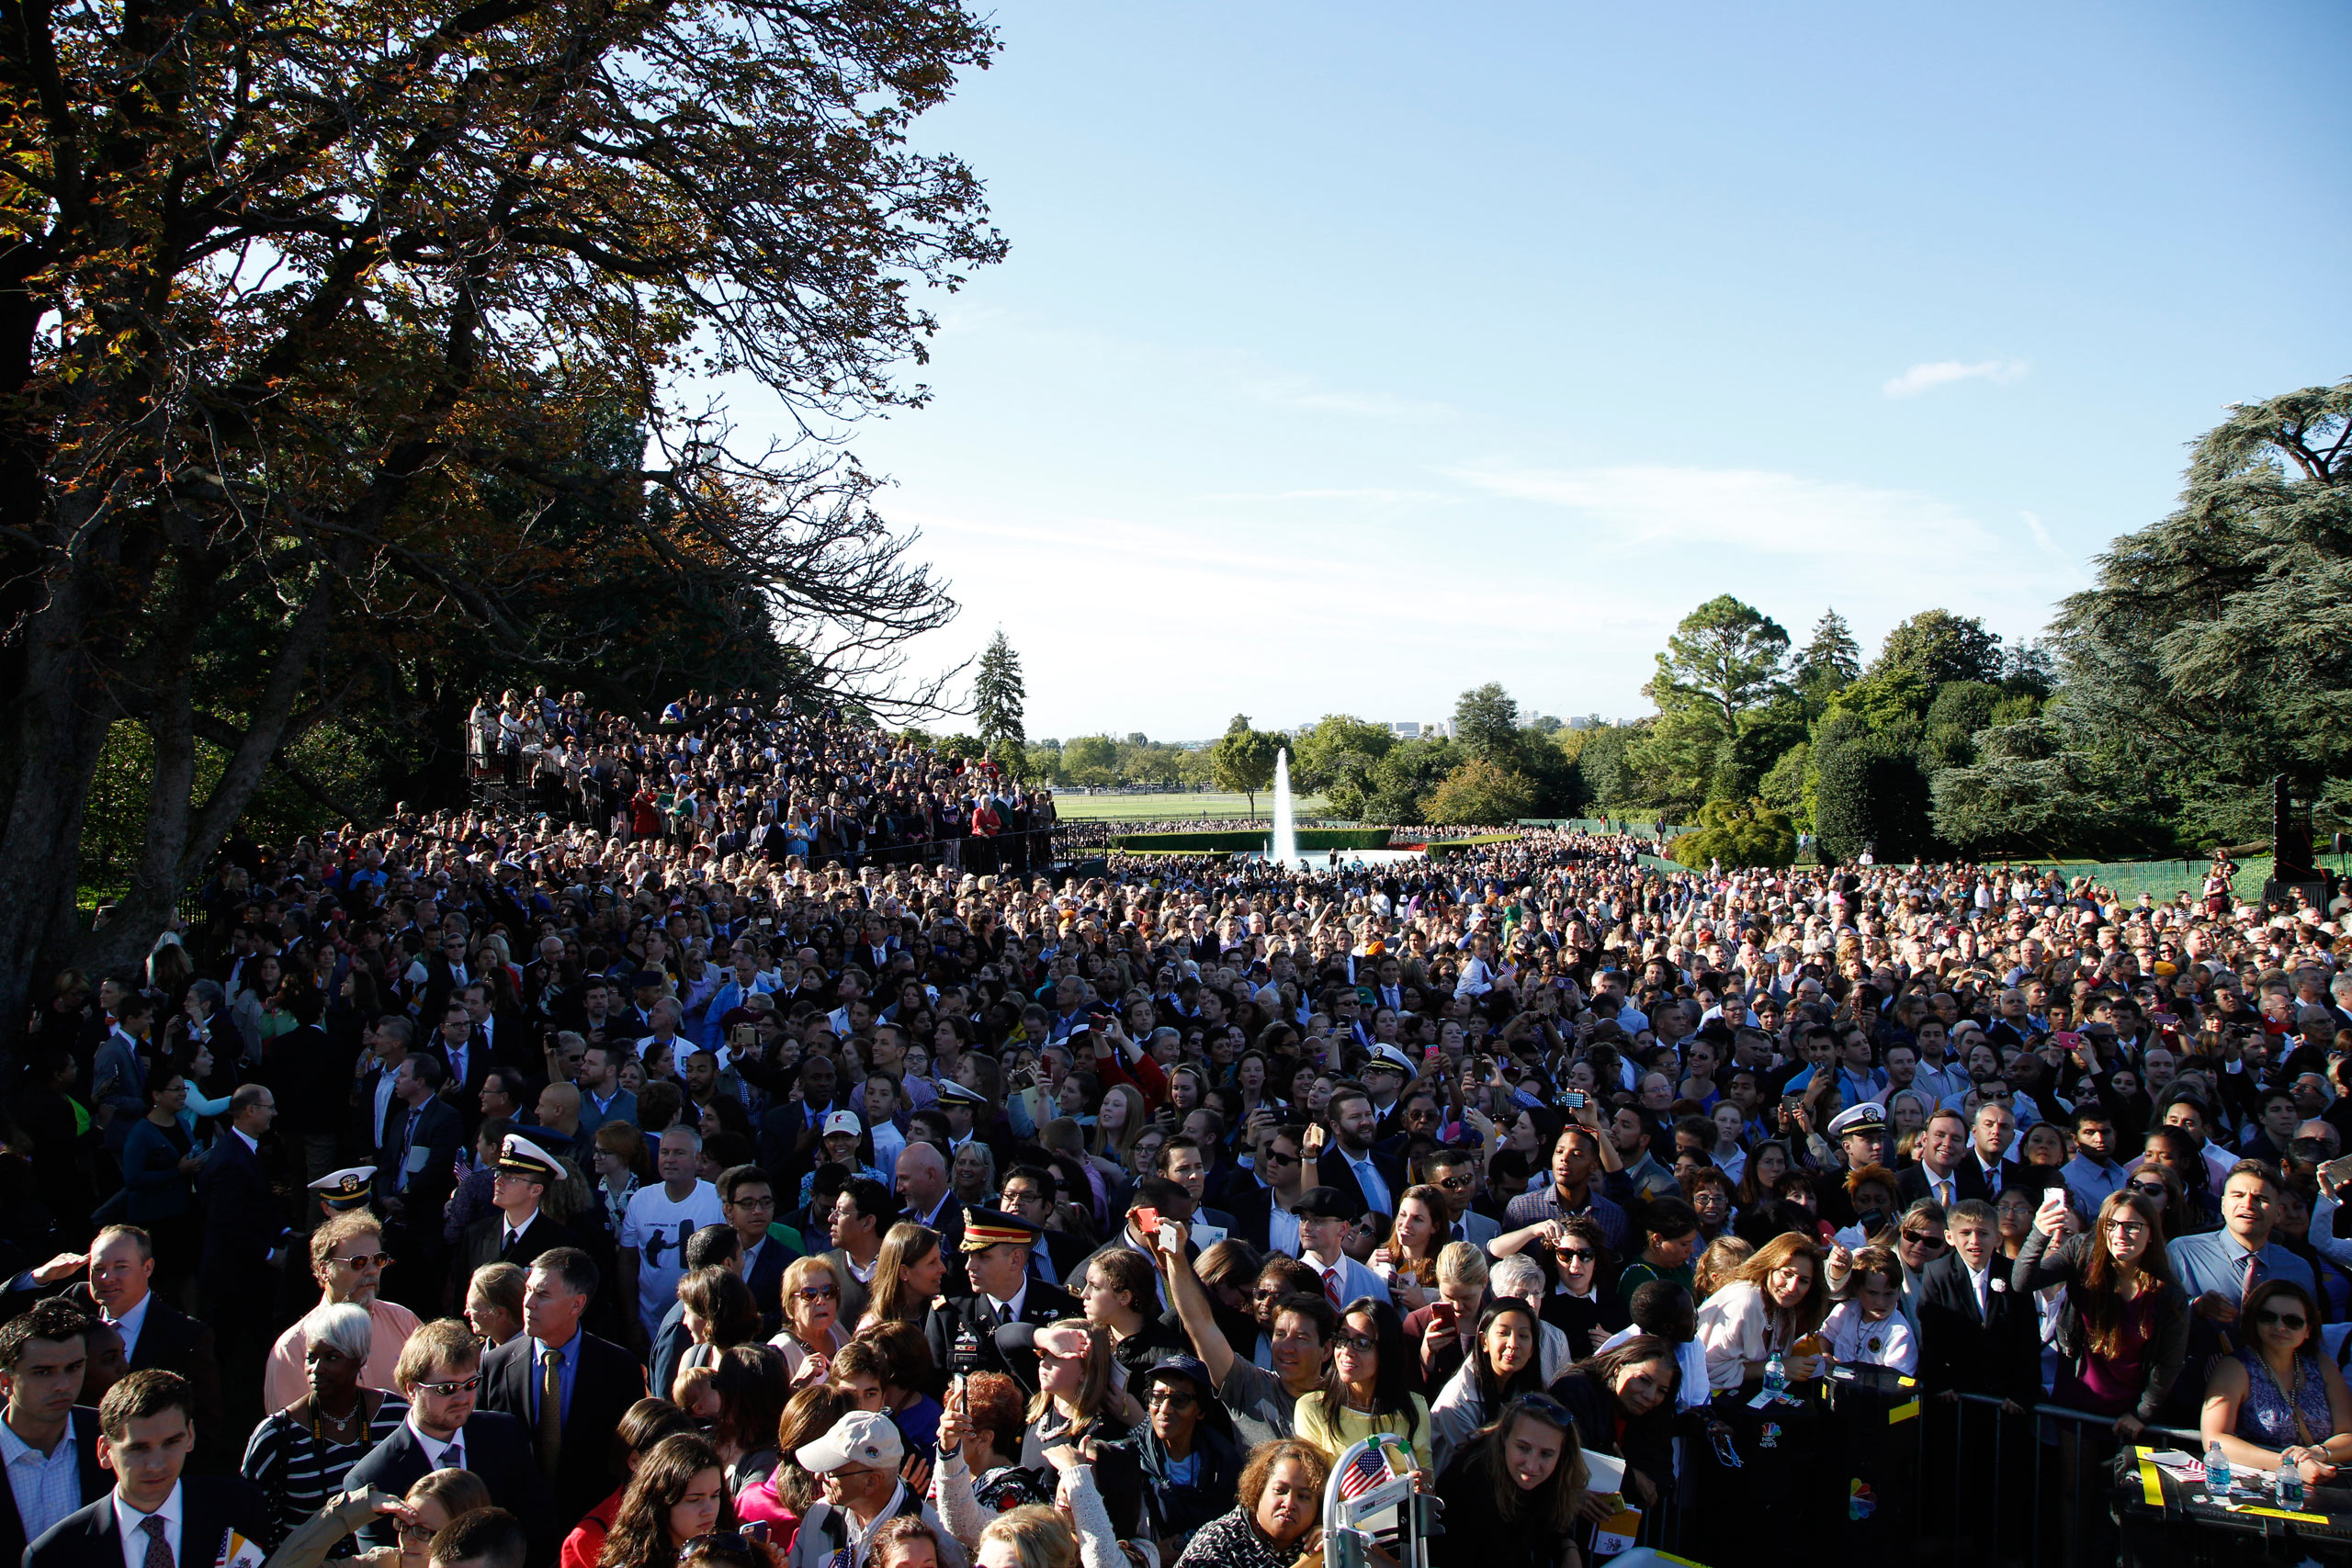 A crowd gathers on the the South Lawn of the White House during the arrival ceremony of Pope Francis. Washington, D.C., Sept. 23, 2015.